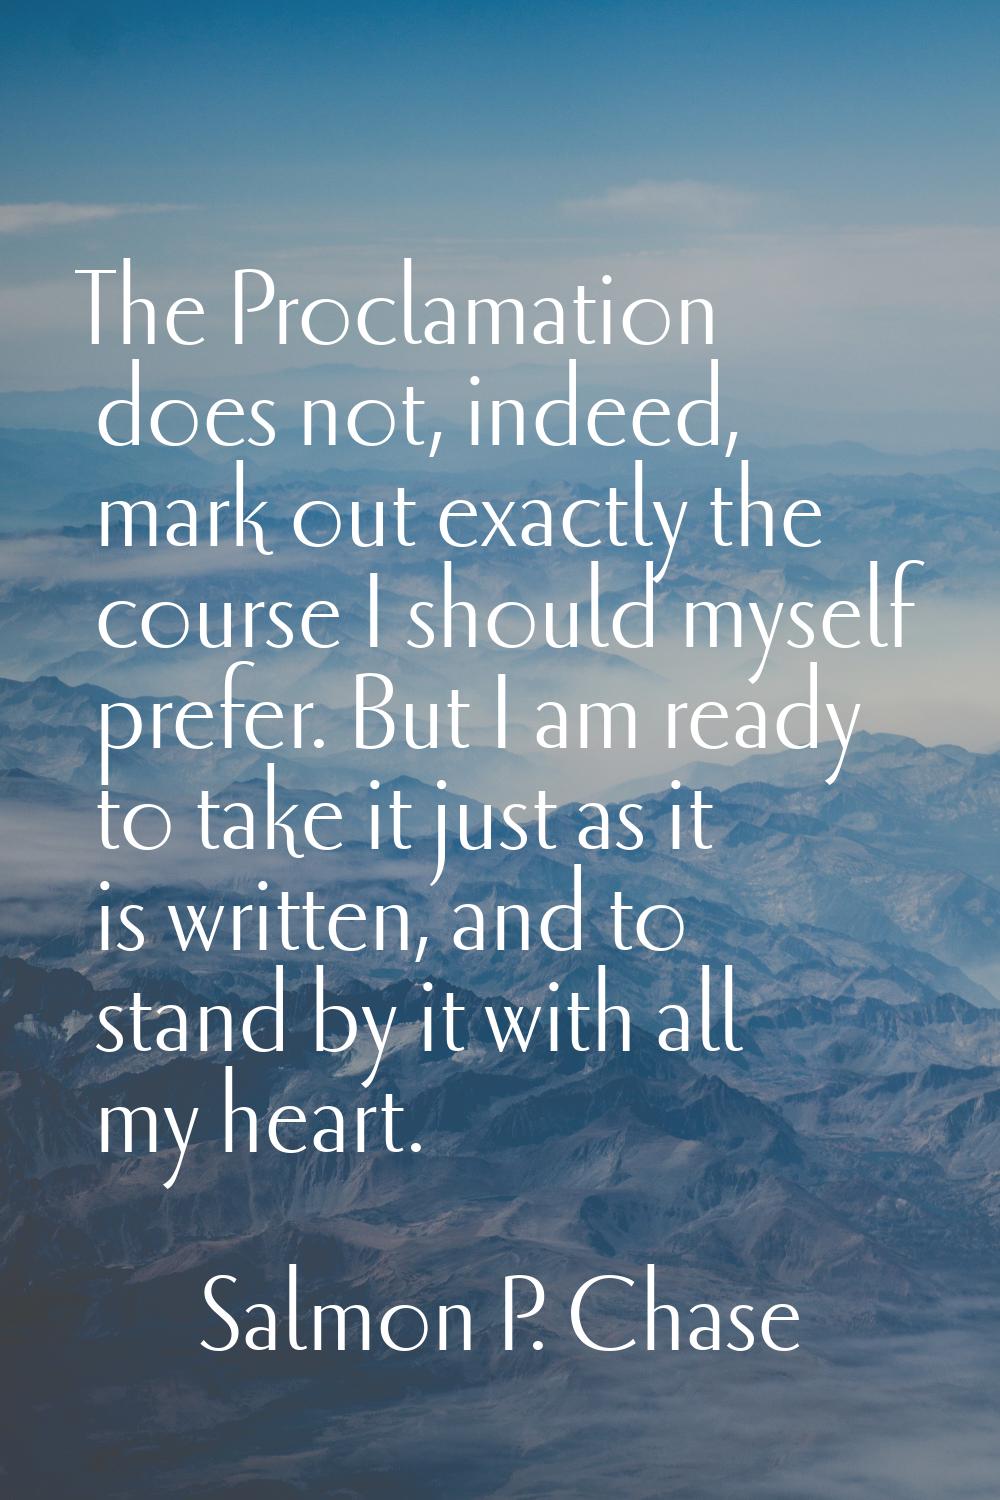 The Proclamation does not, indeed, mark out exactly the course I should myself prefer. But I am rea